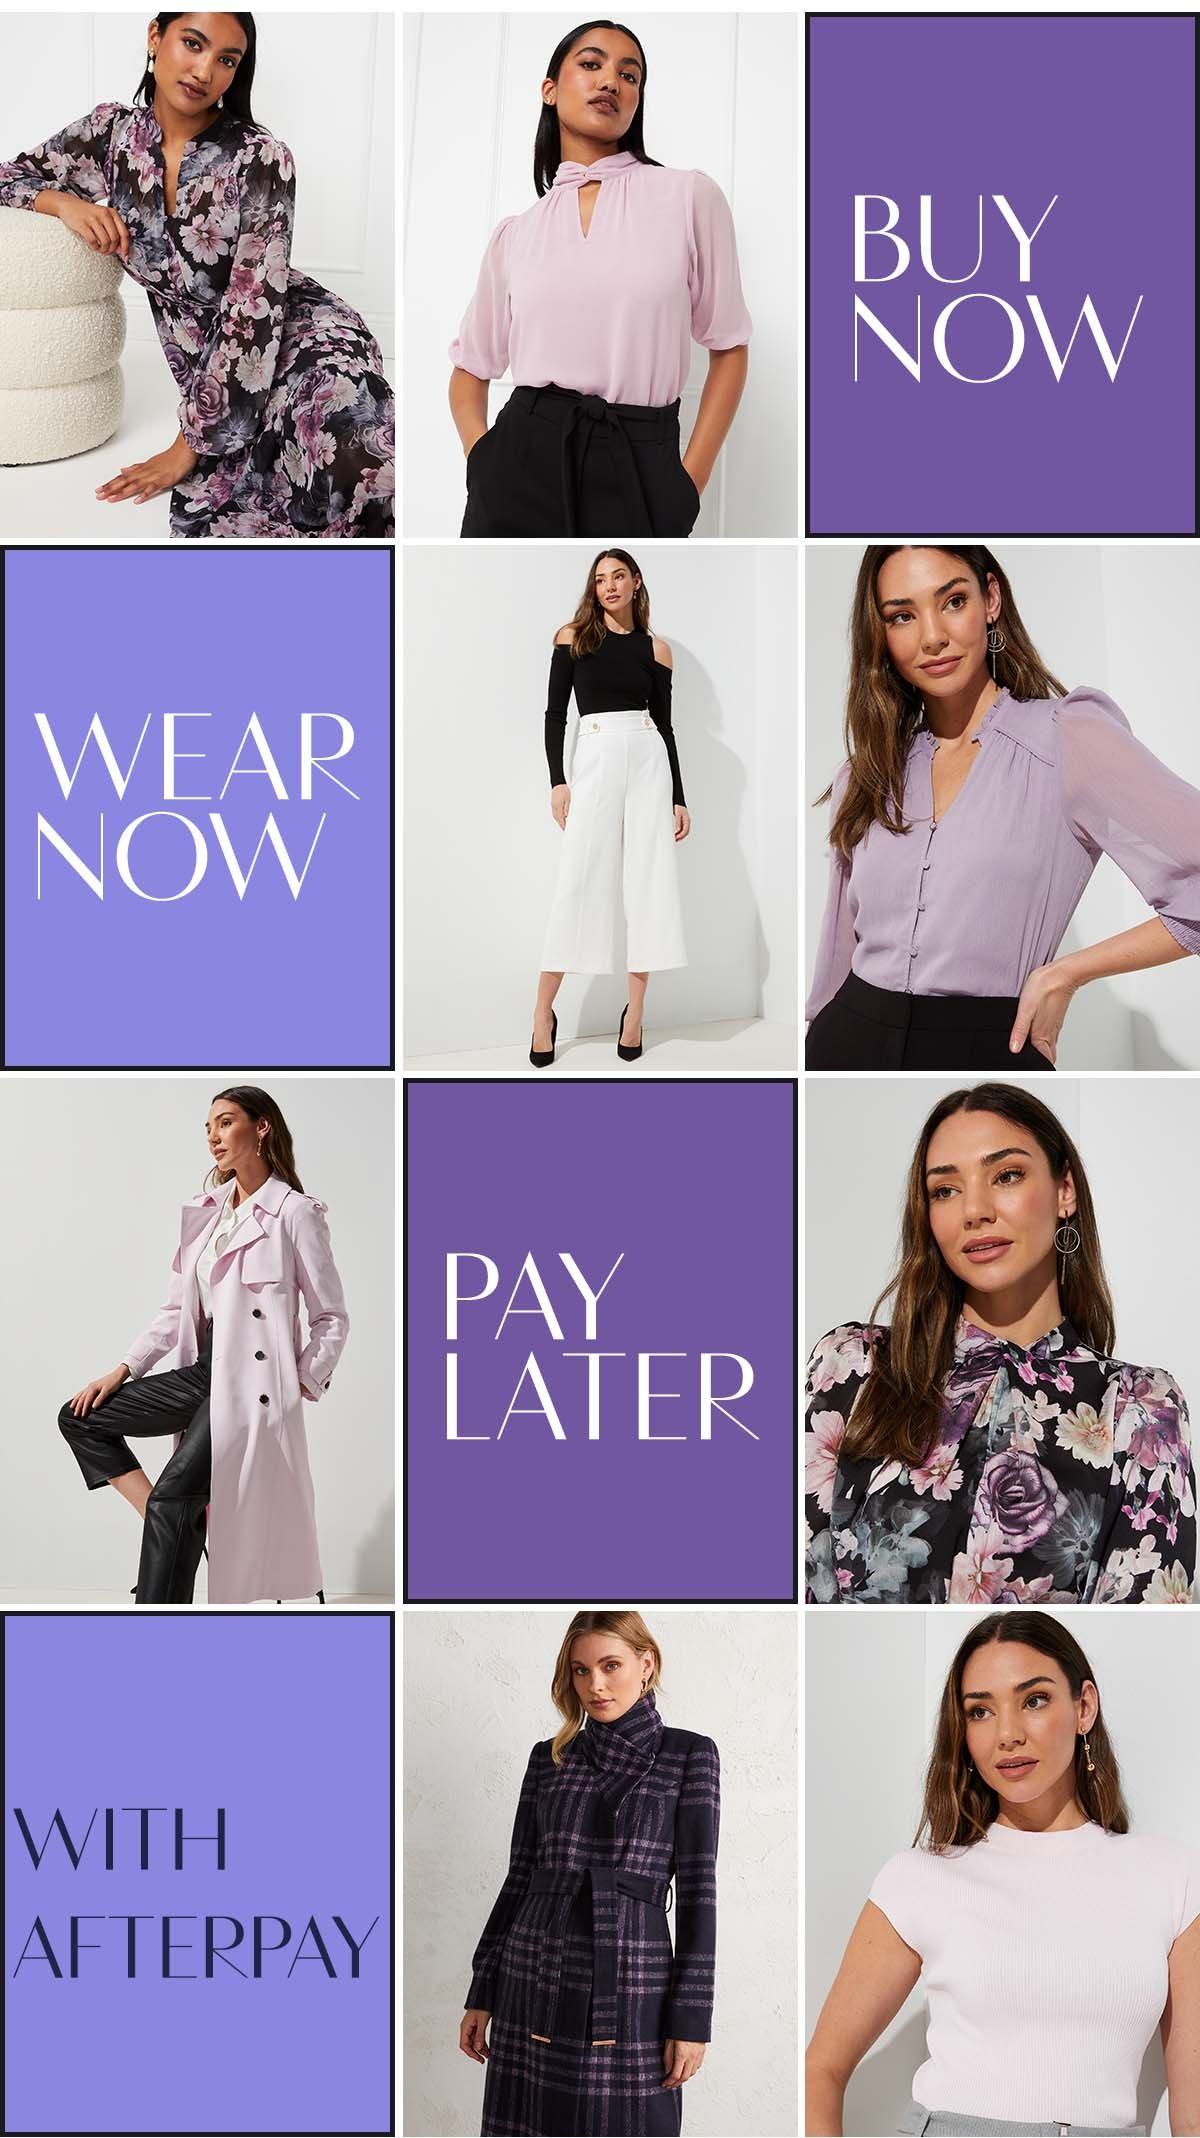 Buy Now, Wear Now, Pay Later